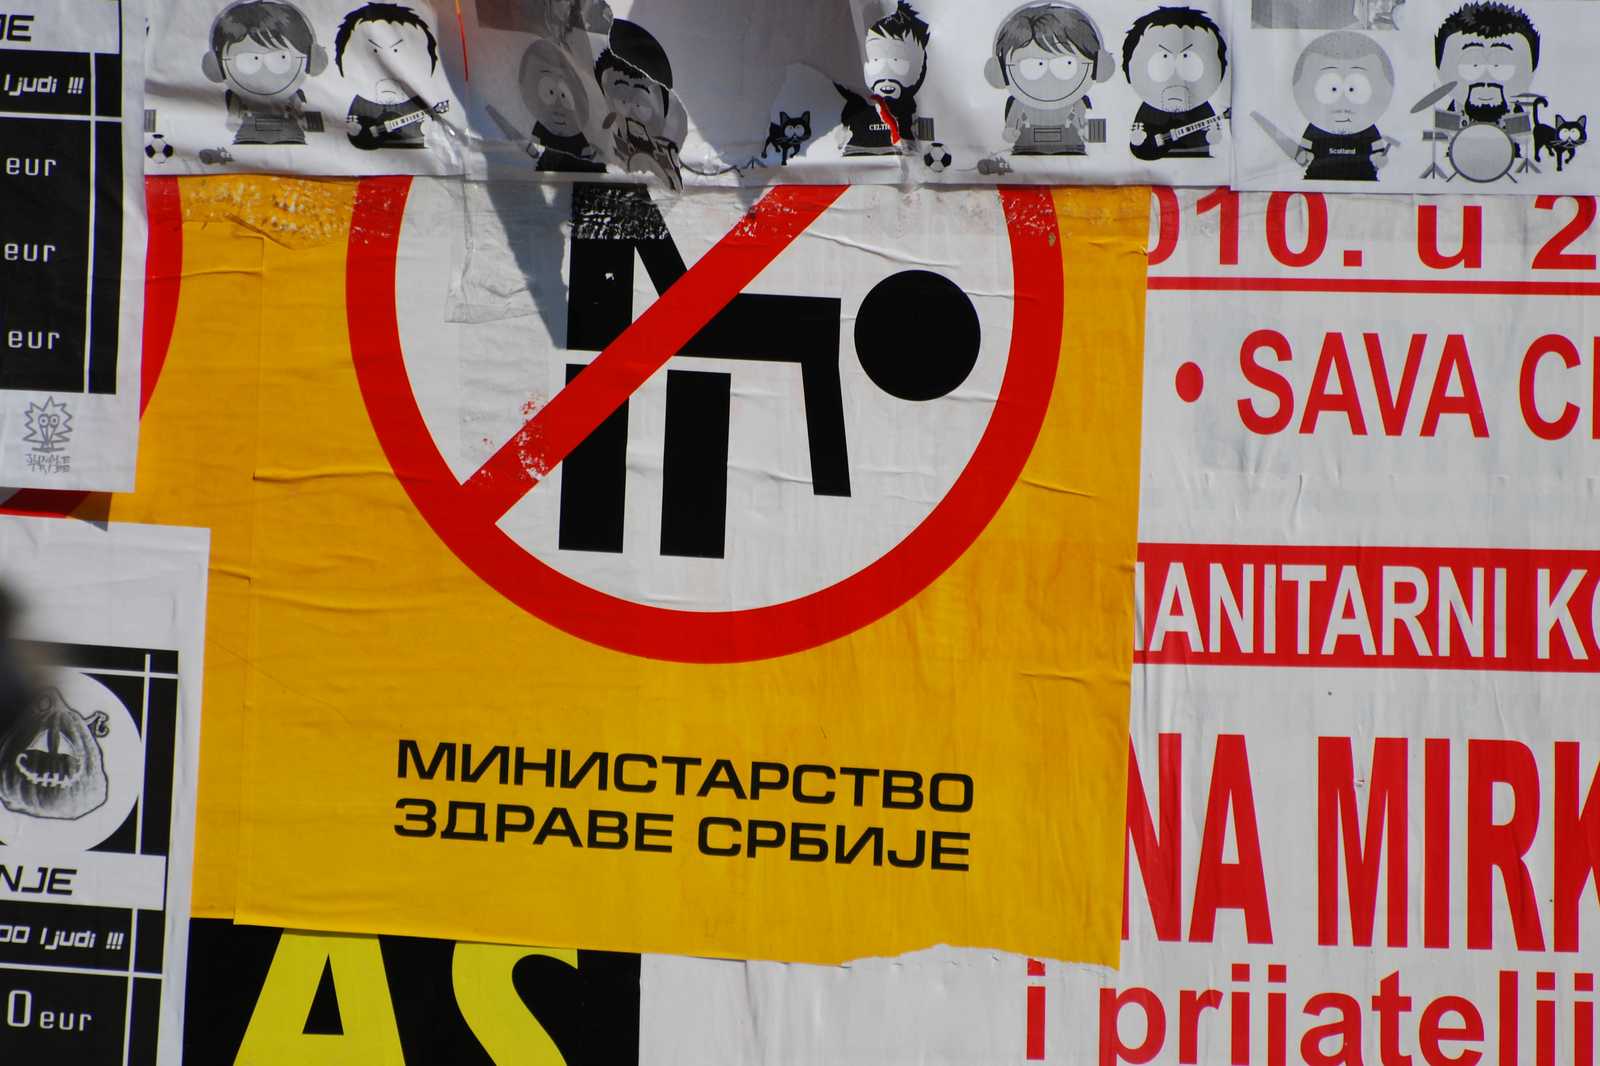 LGBT 2010 - A message sent to all by an extremist right-wing organization, titled: Ministarstvo zdravlja Srbije (The Ministry of Health)